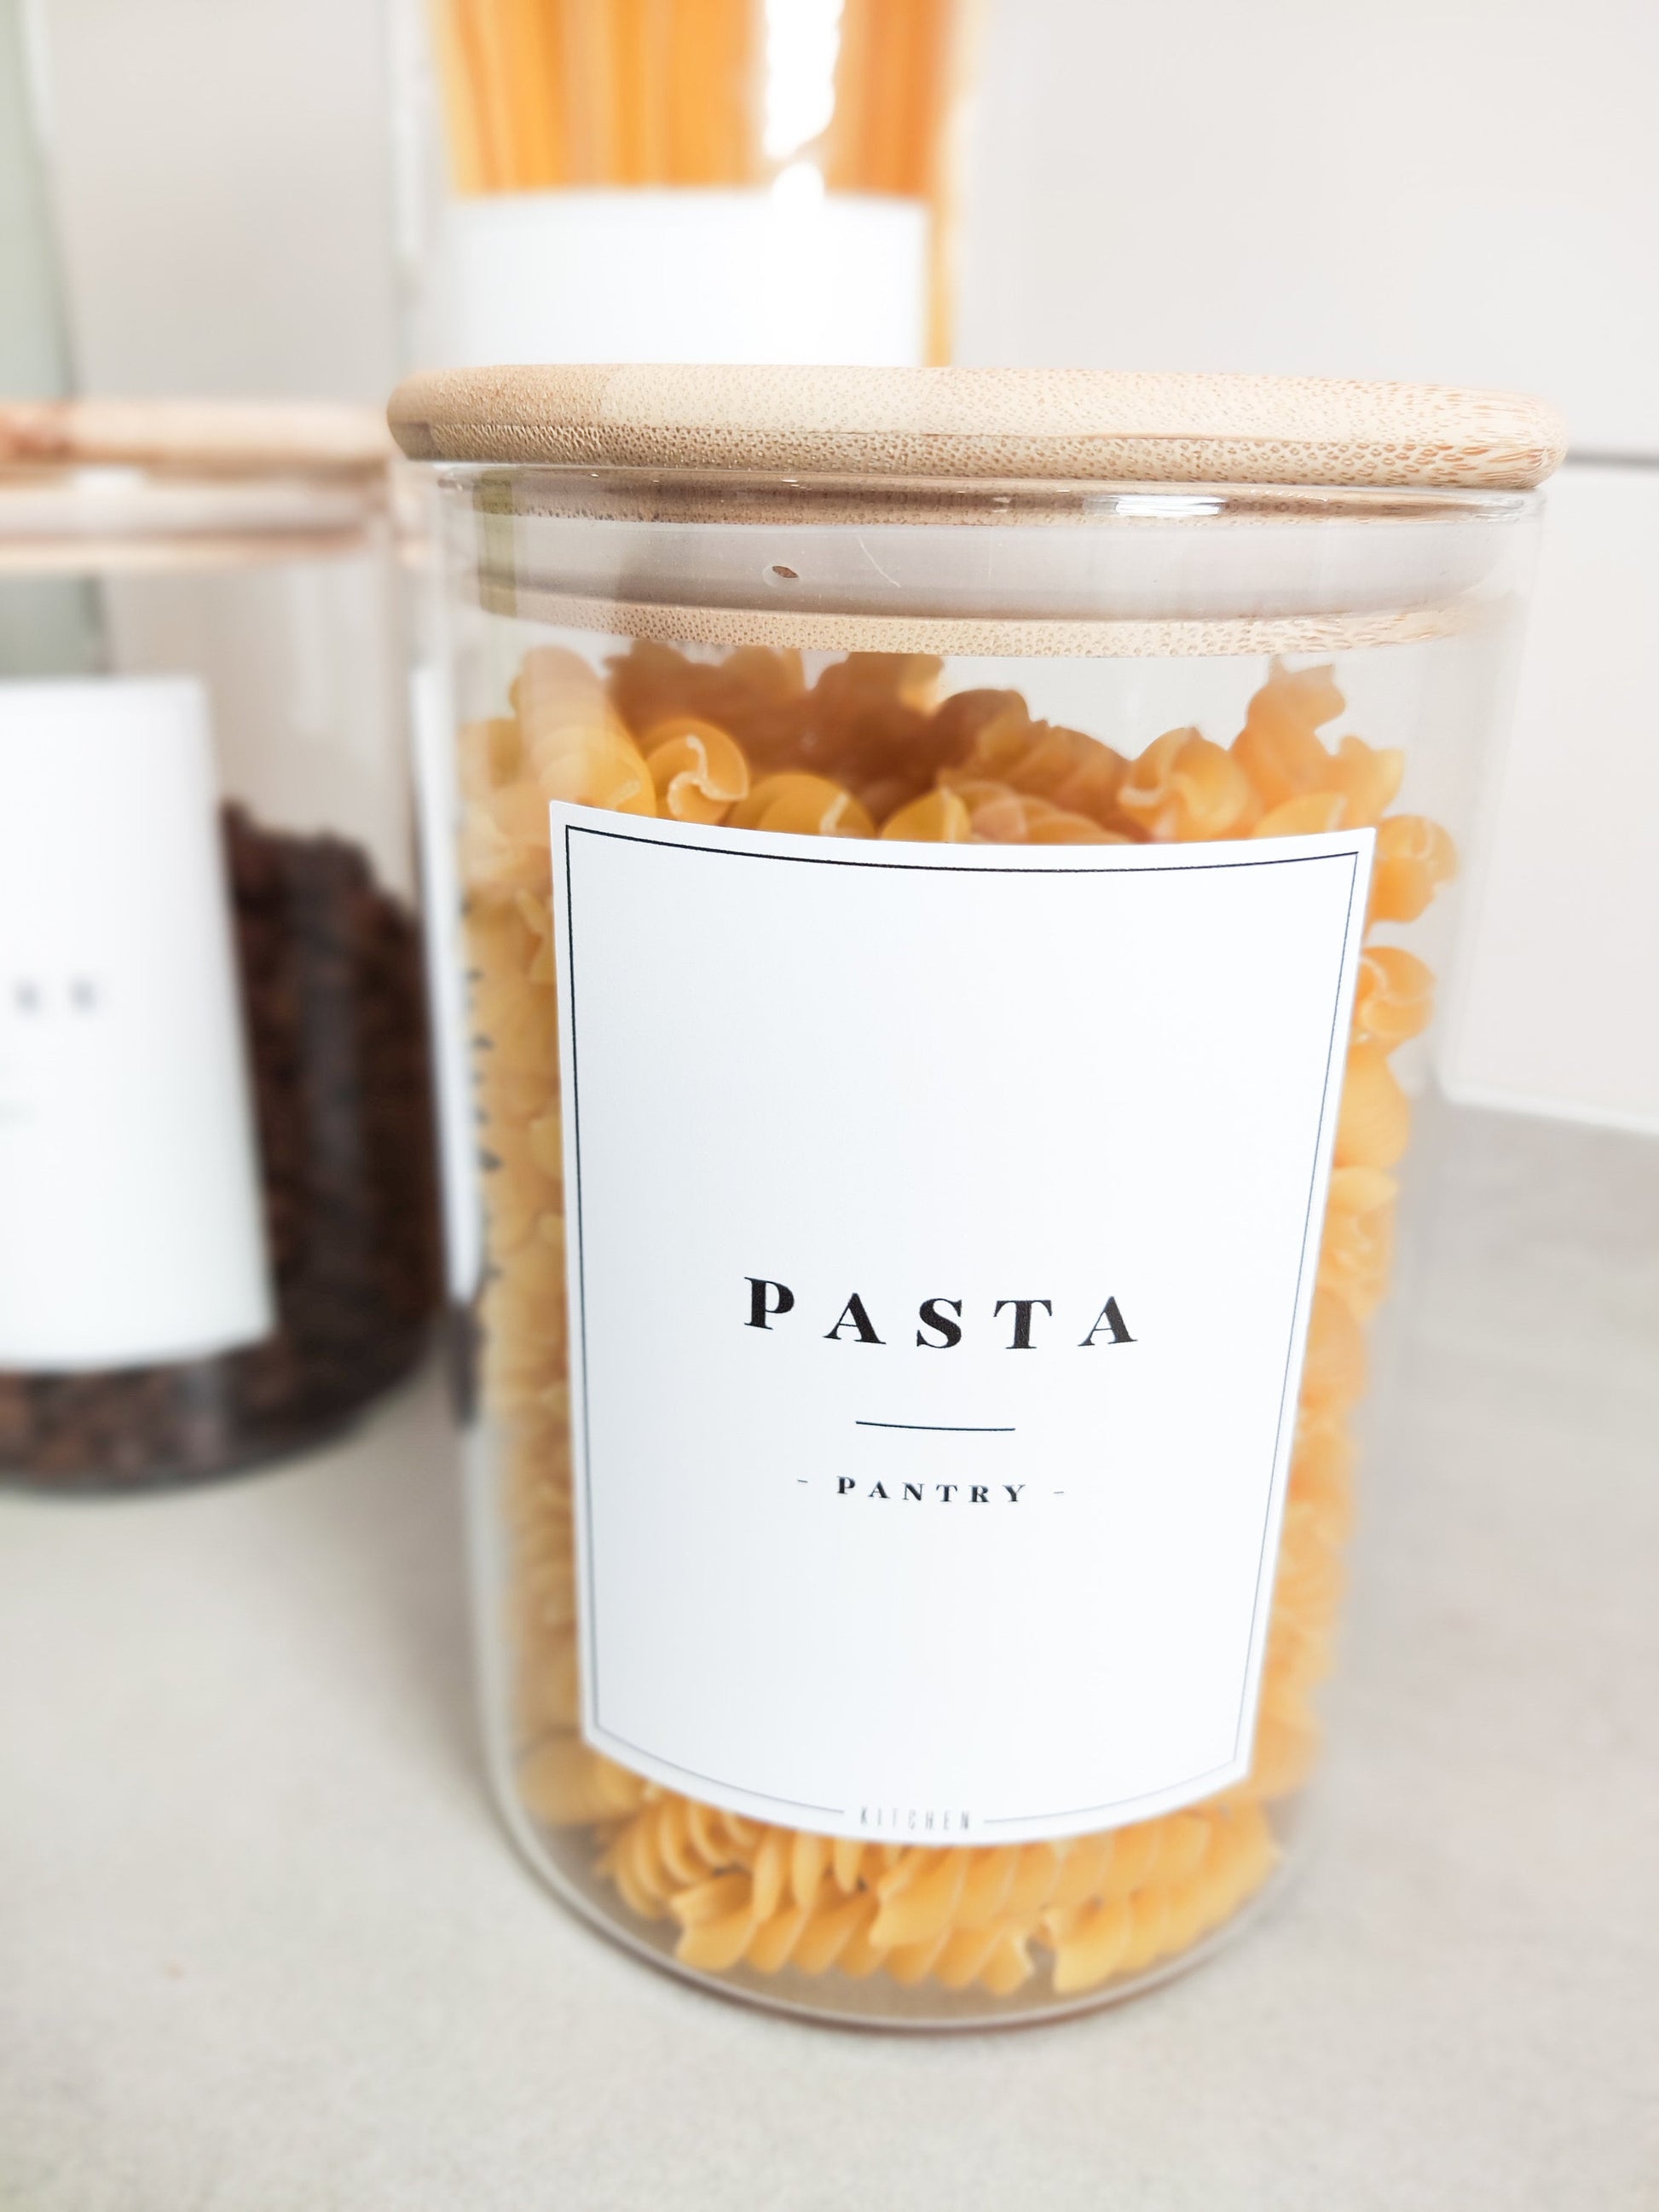 Pantry Labels Stickers For Kitchen Organisation Jars Storage For Tea Coffee Sugar Pasta Rice Spaghetti Flour Waterproof Stickers Home